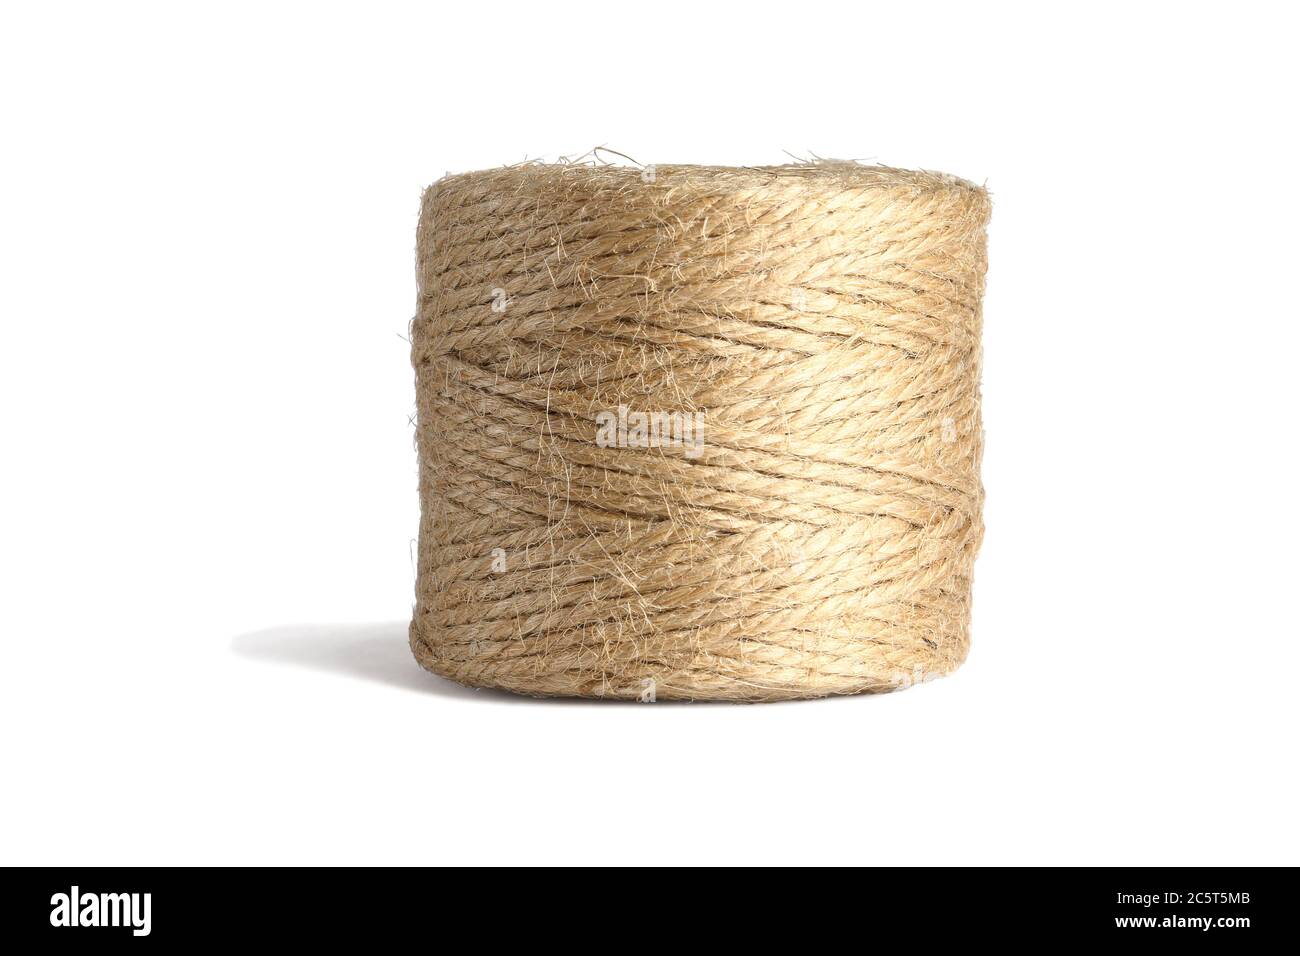 Roll of hemp thick string stock image. Image of reflection - 13436361